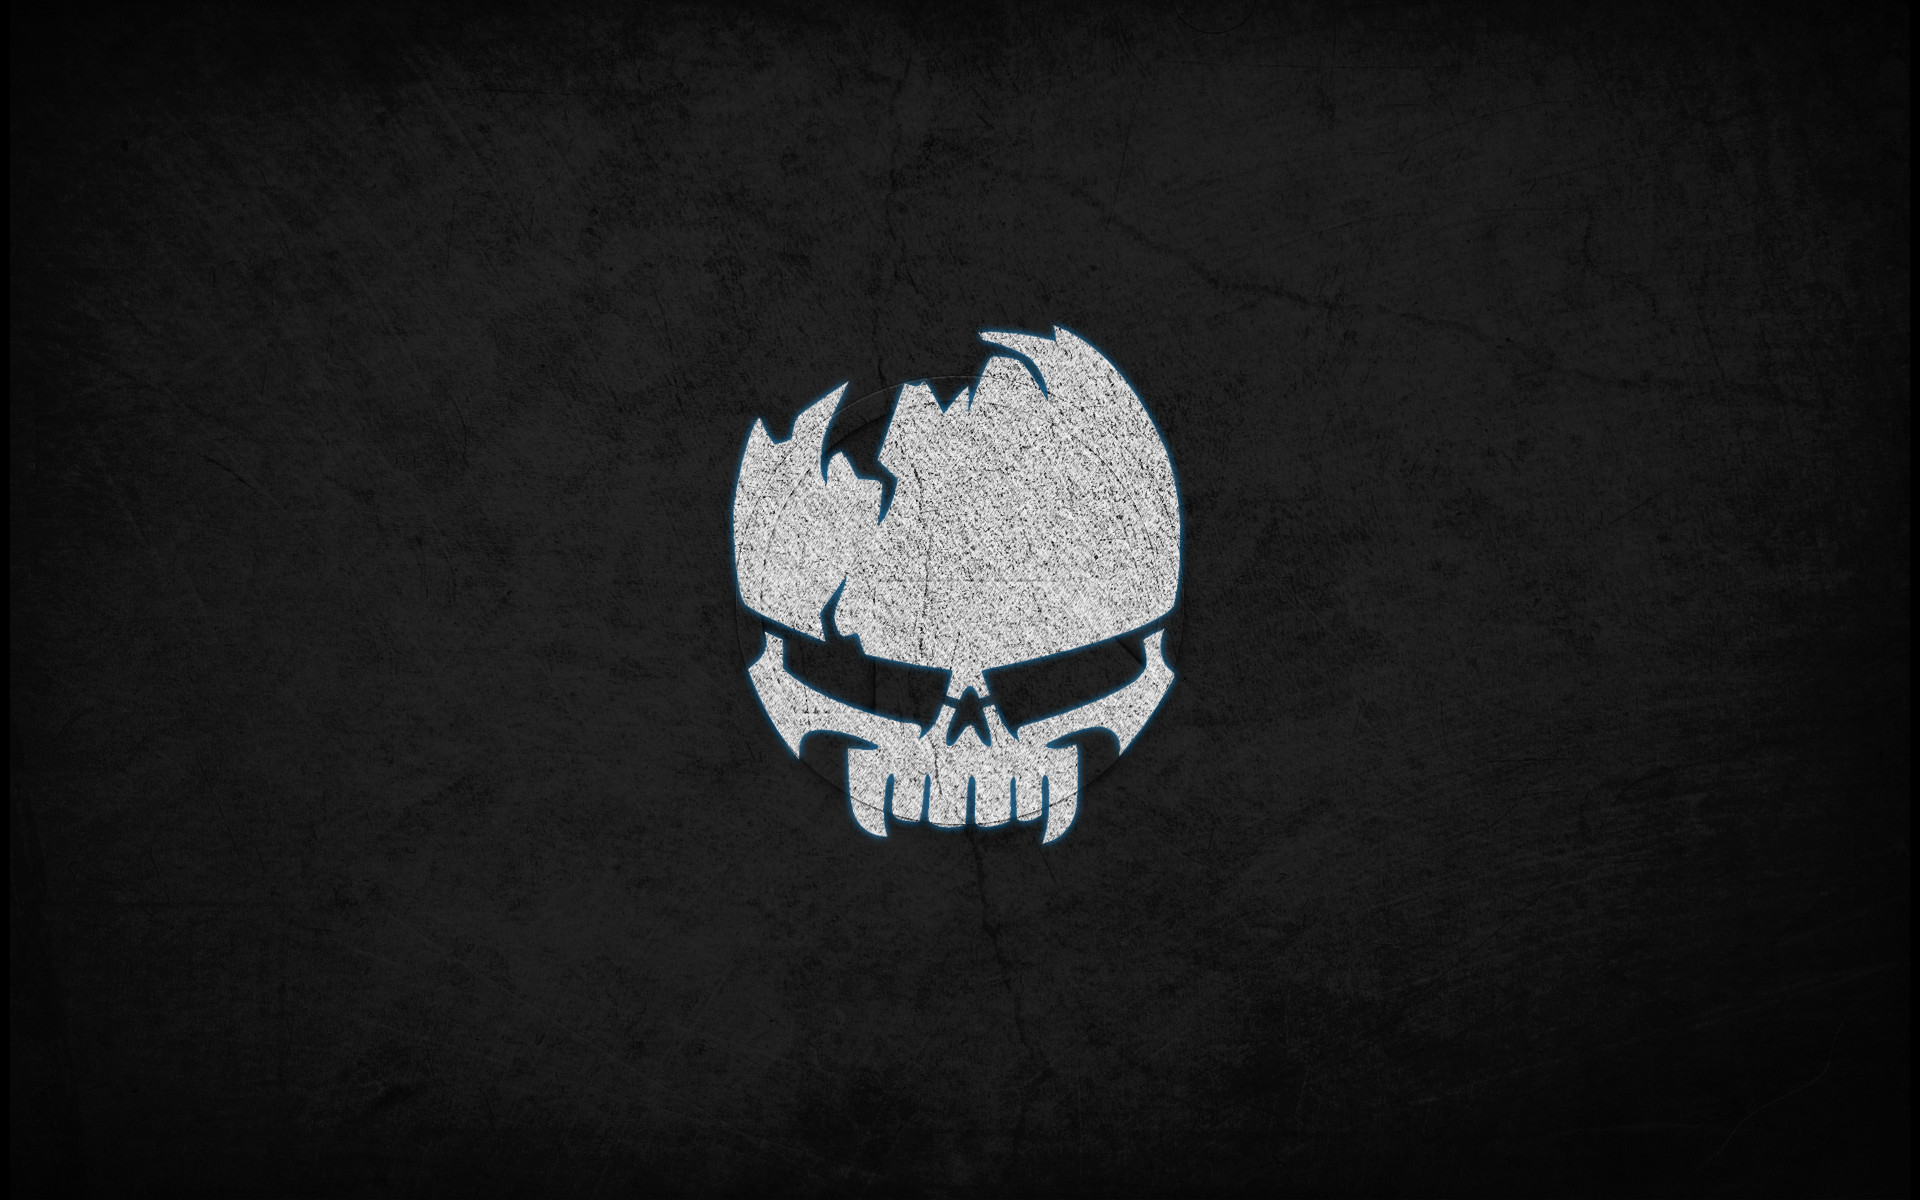 1920x1200 Some cool wallpapers I wanted to share with you guys C: